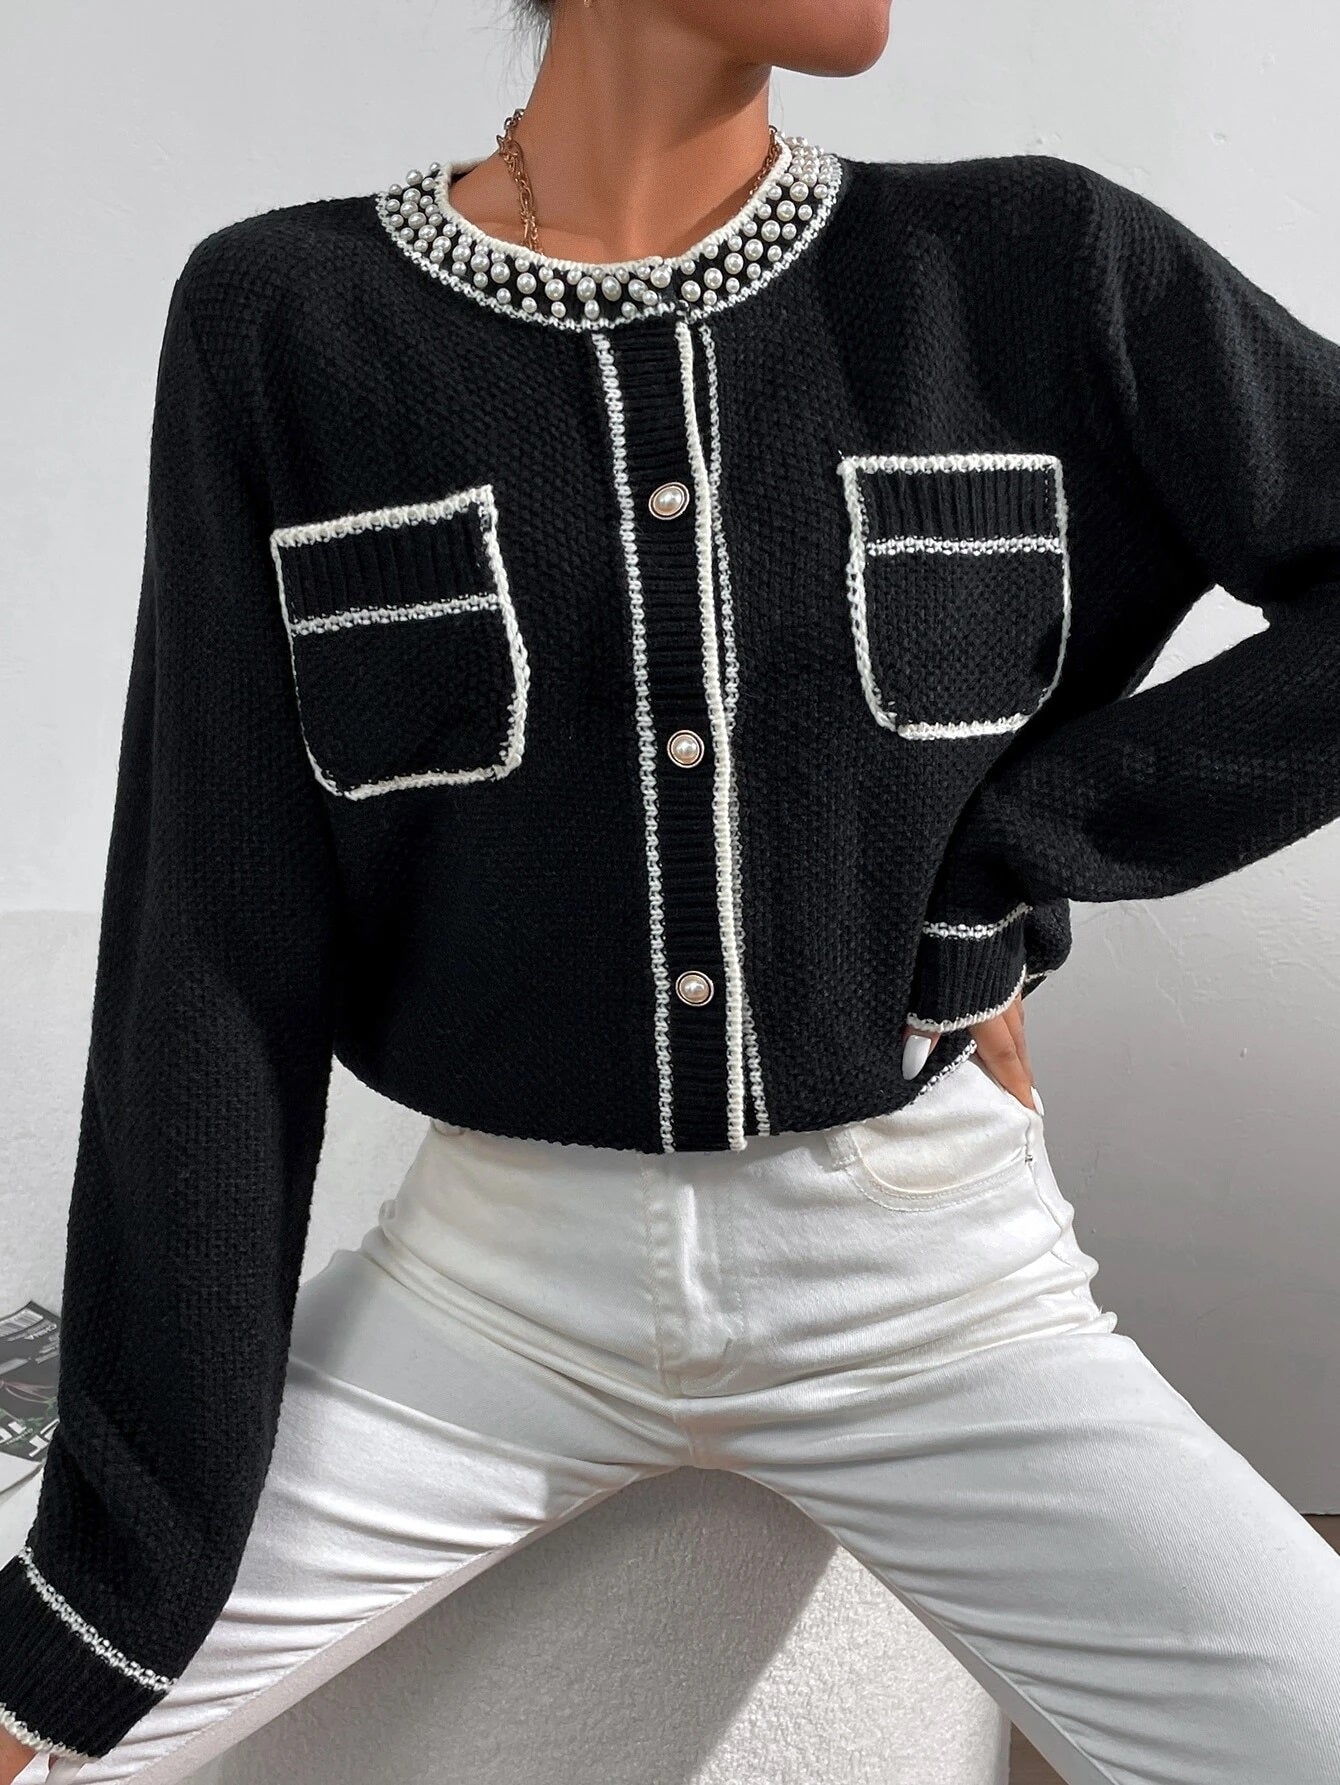 CM-CS226247 Women Casual Seoul Style Pearl Beaded Pocket Patched Cardigan - Black